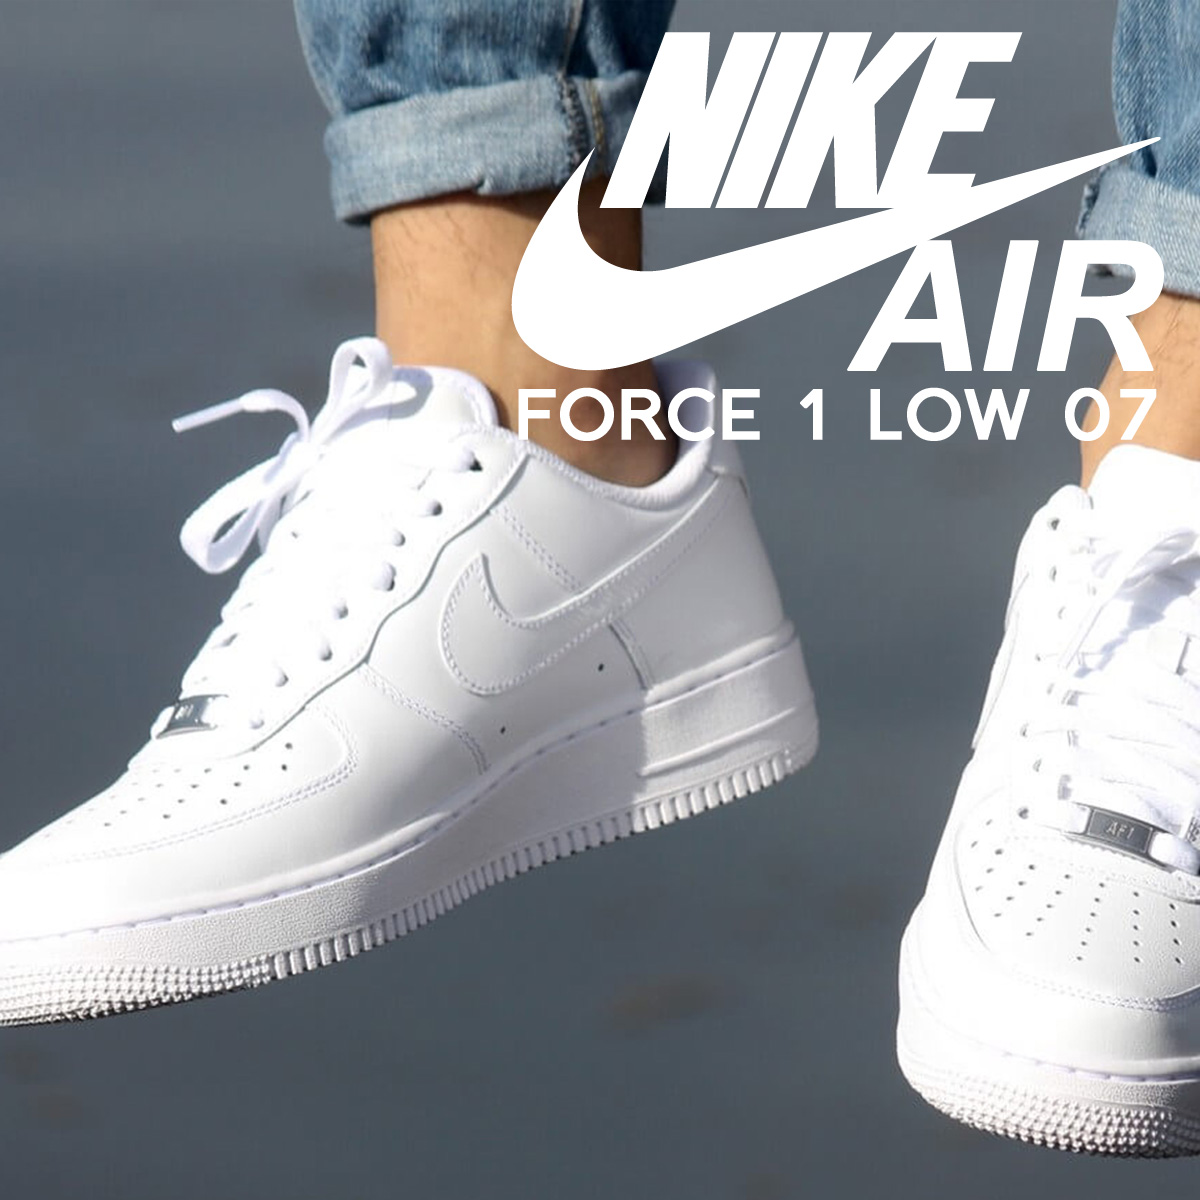 difference between air force 1 low and 07